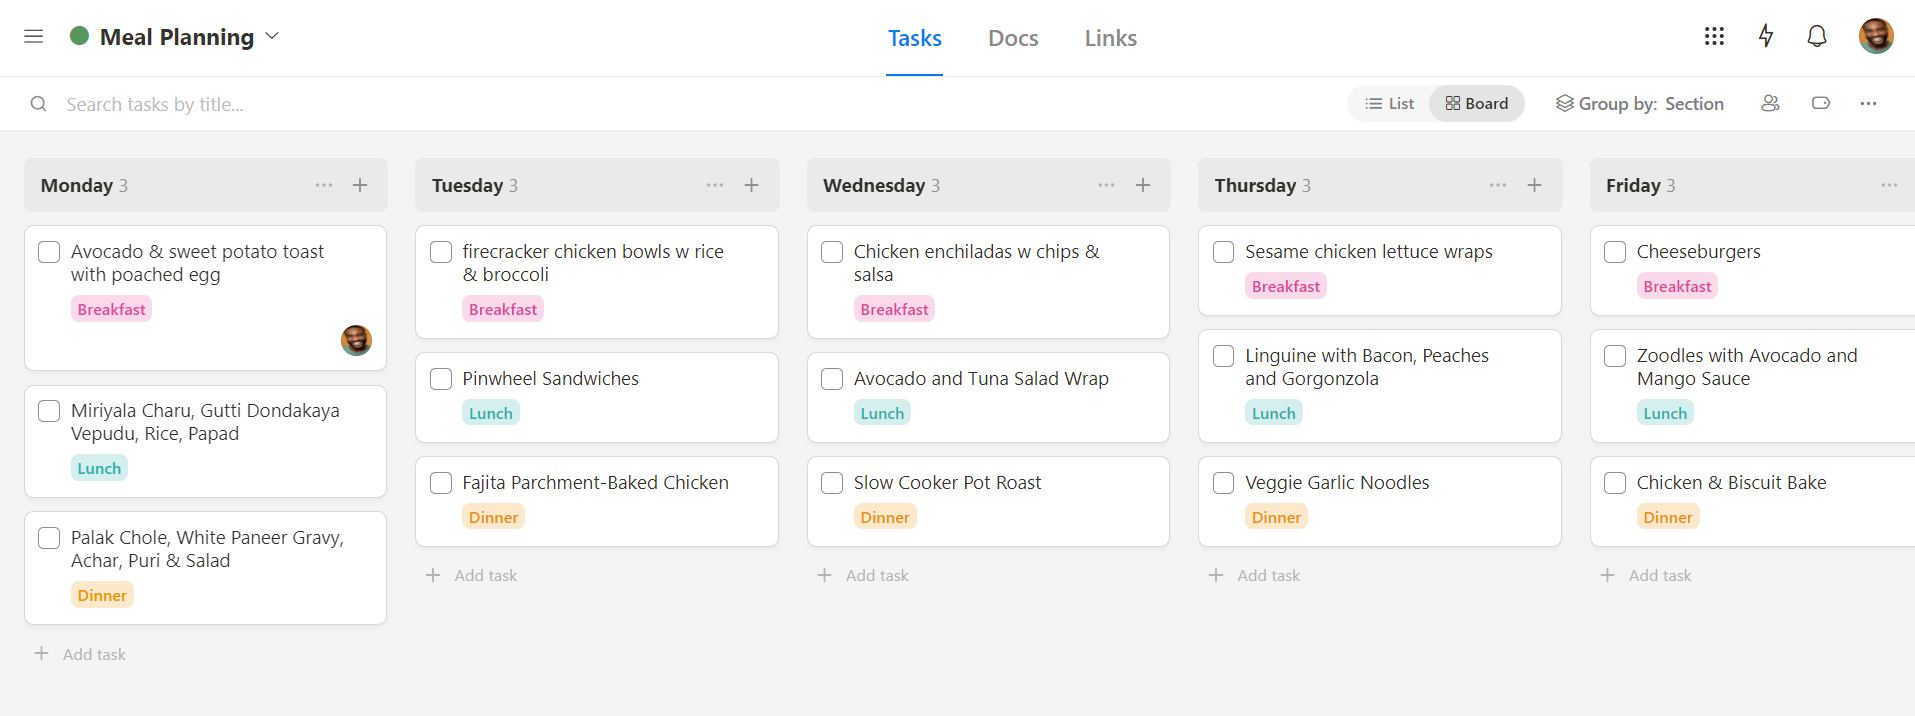 Upbase's Tasks is highly customizable into family's meal planners